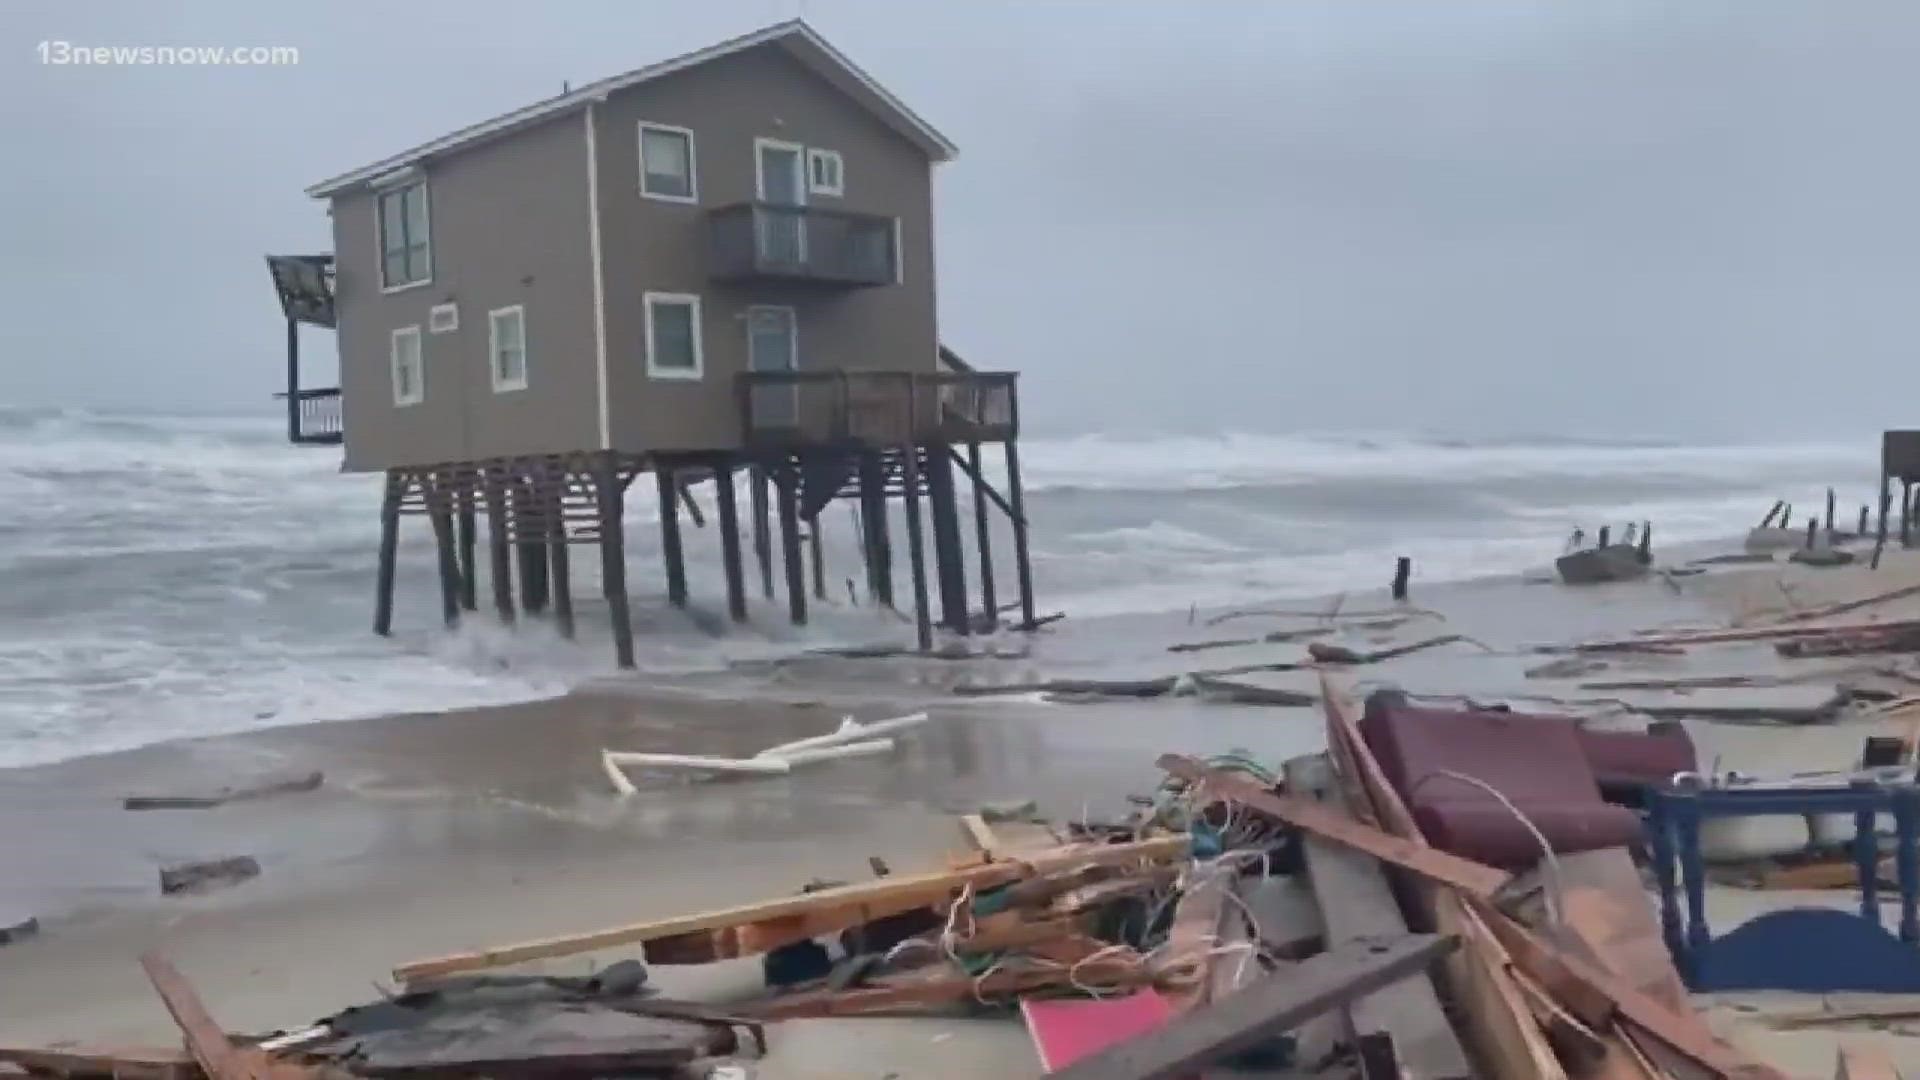 Mother nature is forcing some people on the Outer Banks to make tough choices about their homes.